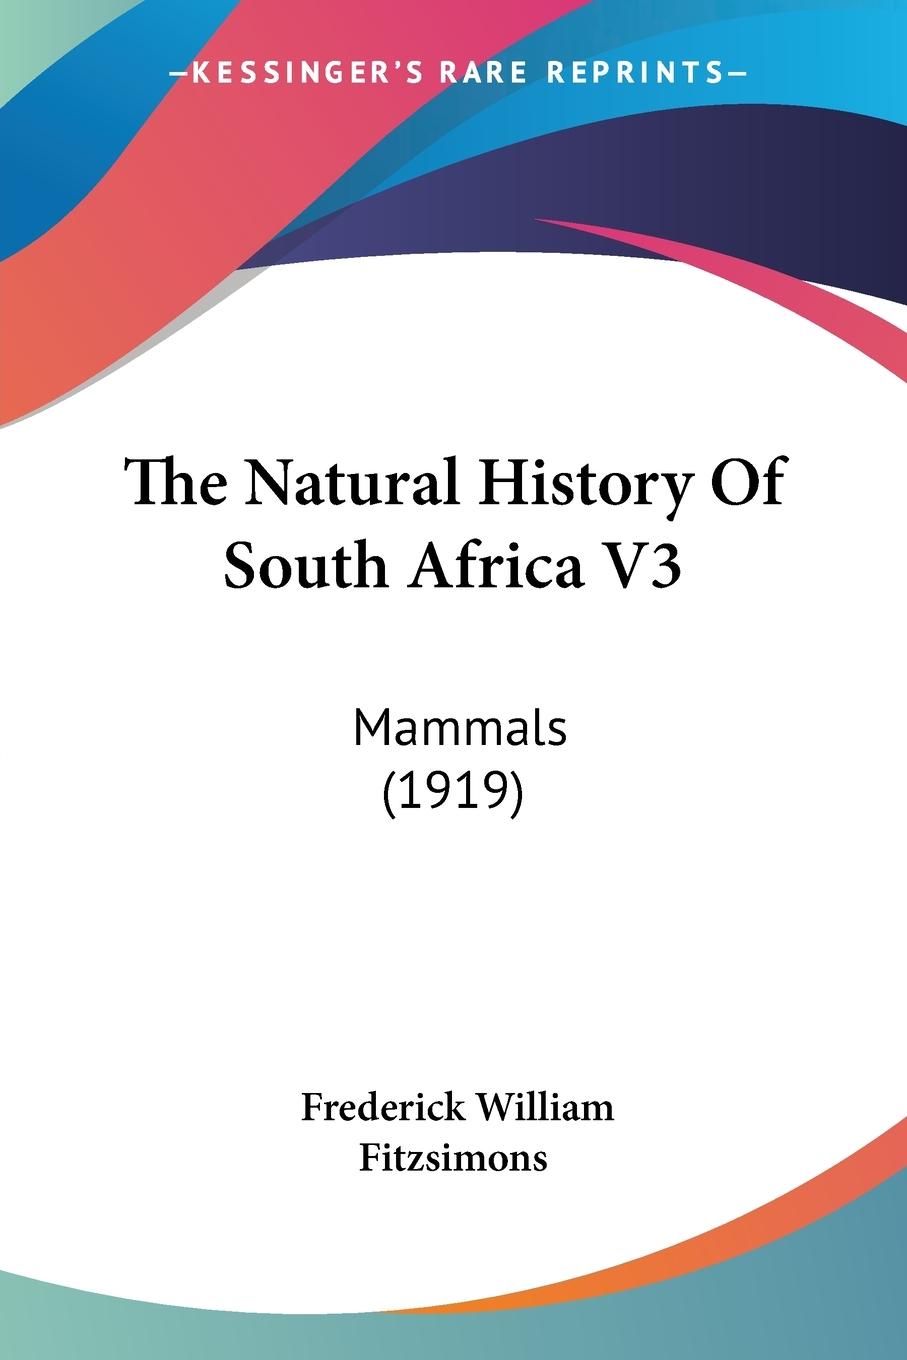 The Natural History Of South Africa V3 - Fitzsimons, Frederick William